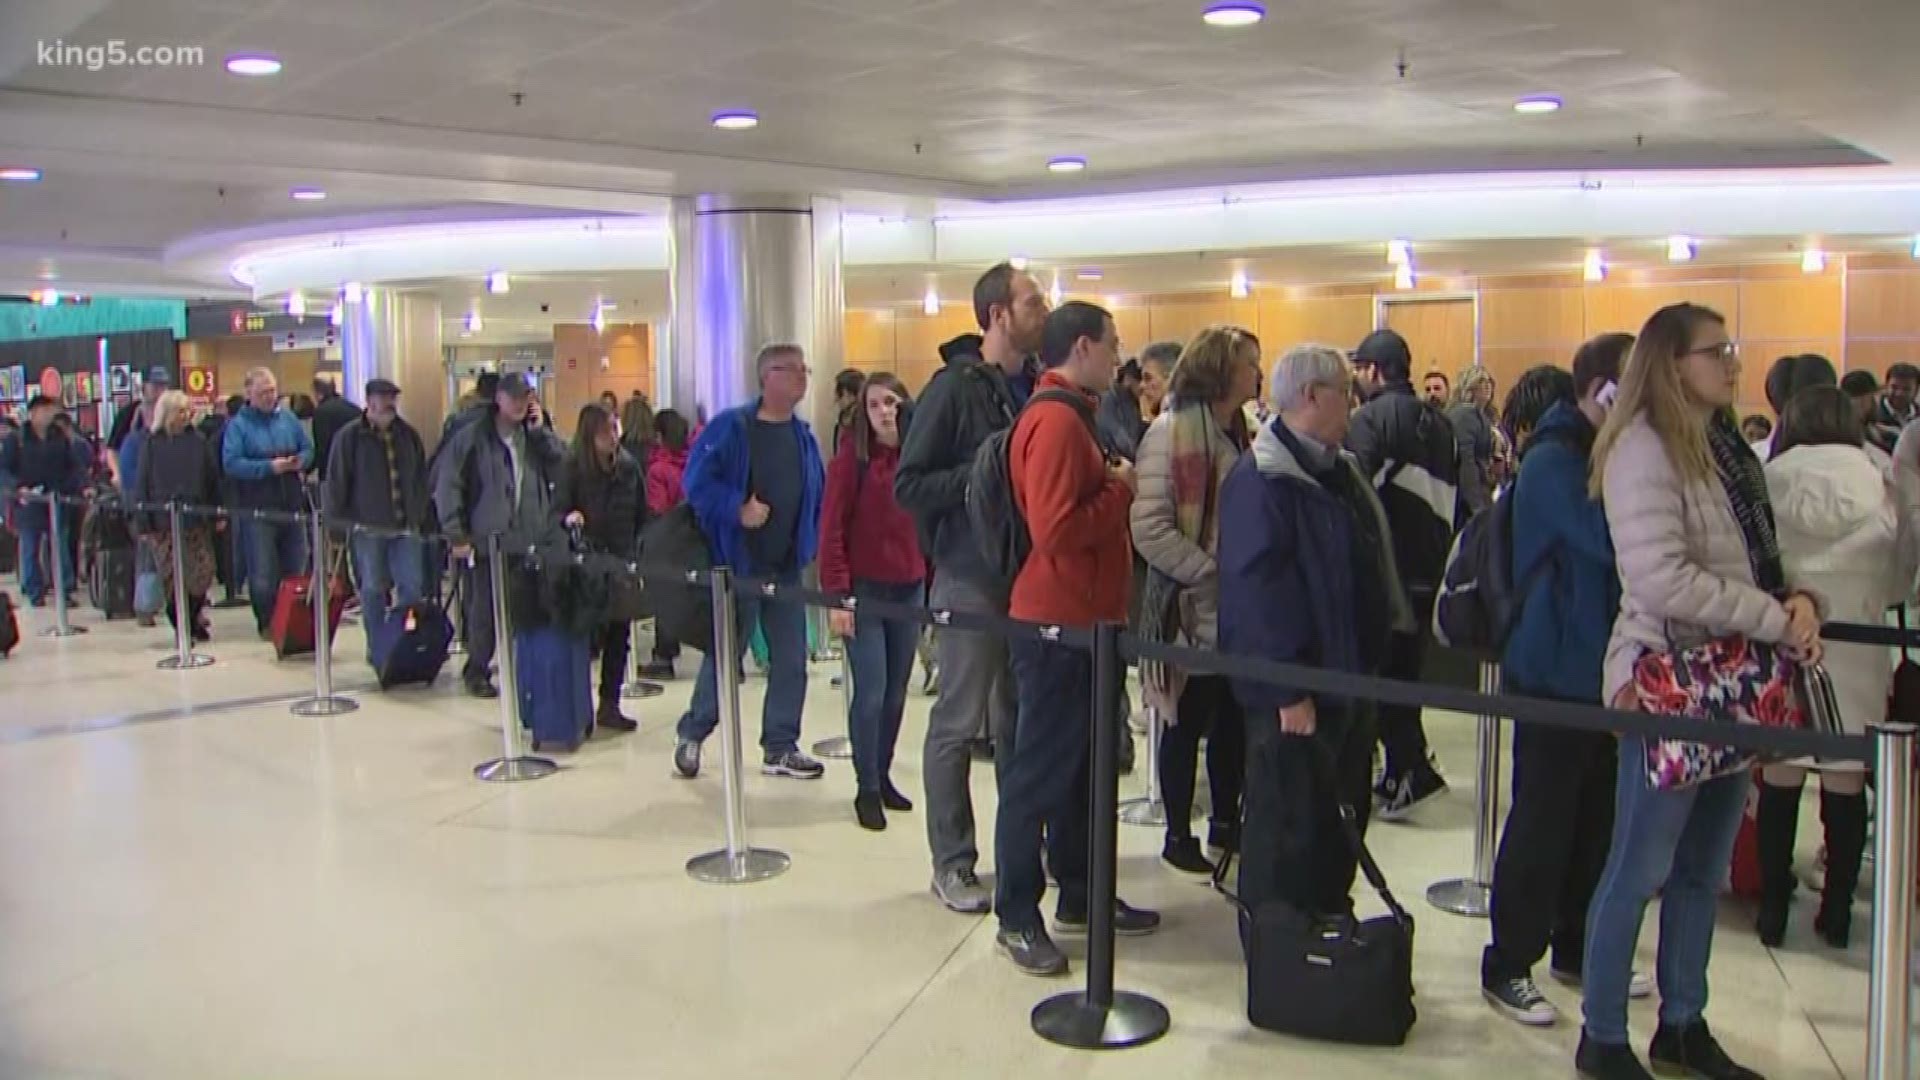 It's a mad house at Sea-Tac Airport on Friday with huge crowds of travelers trying to get out of town ahead of a snowstorm.